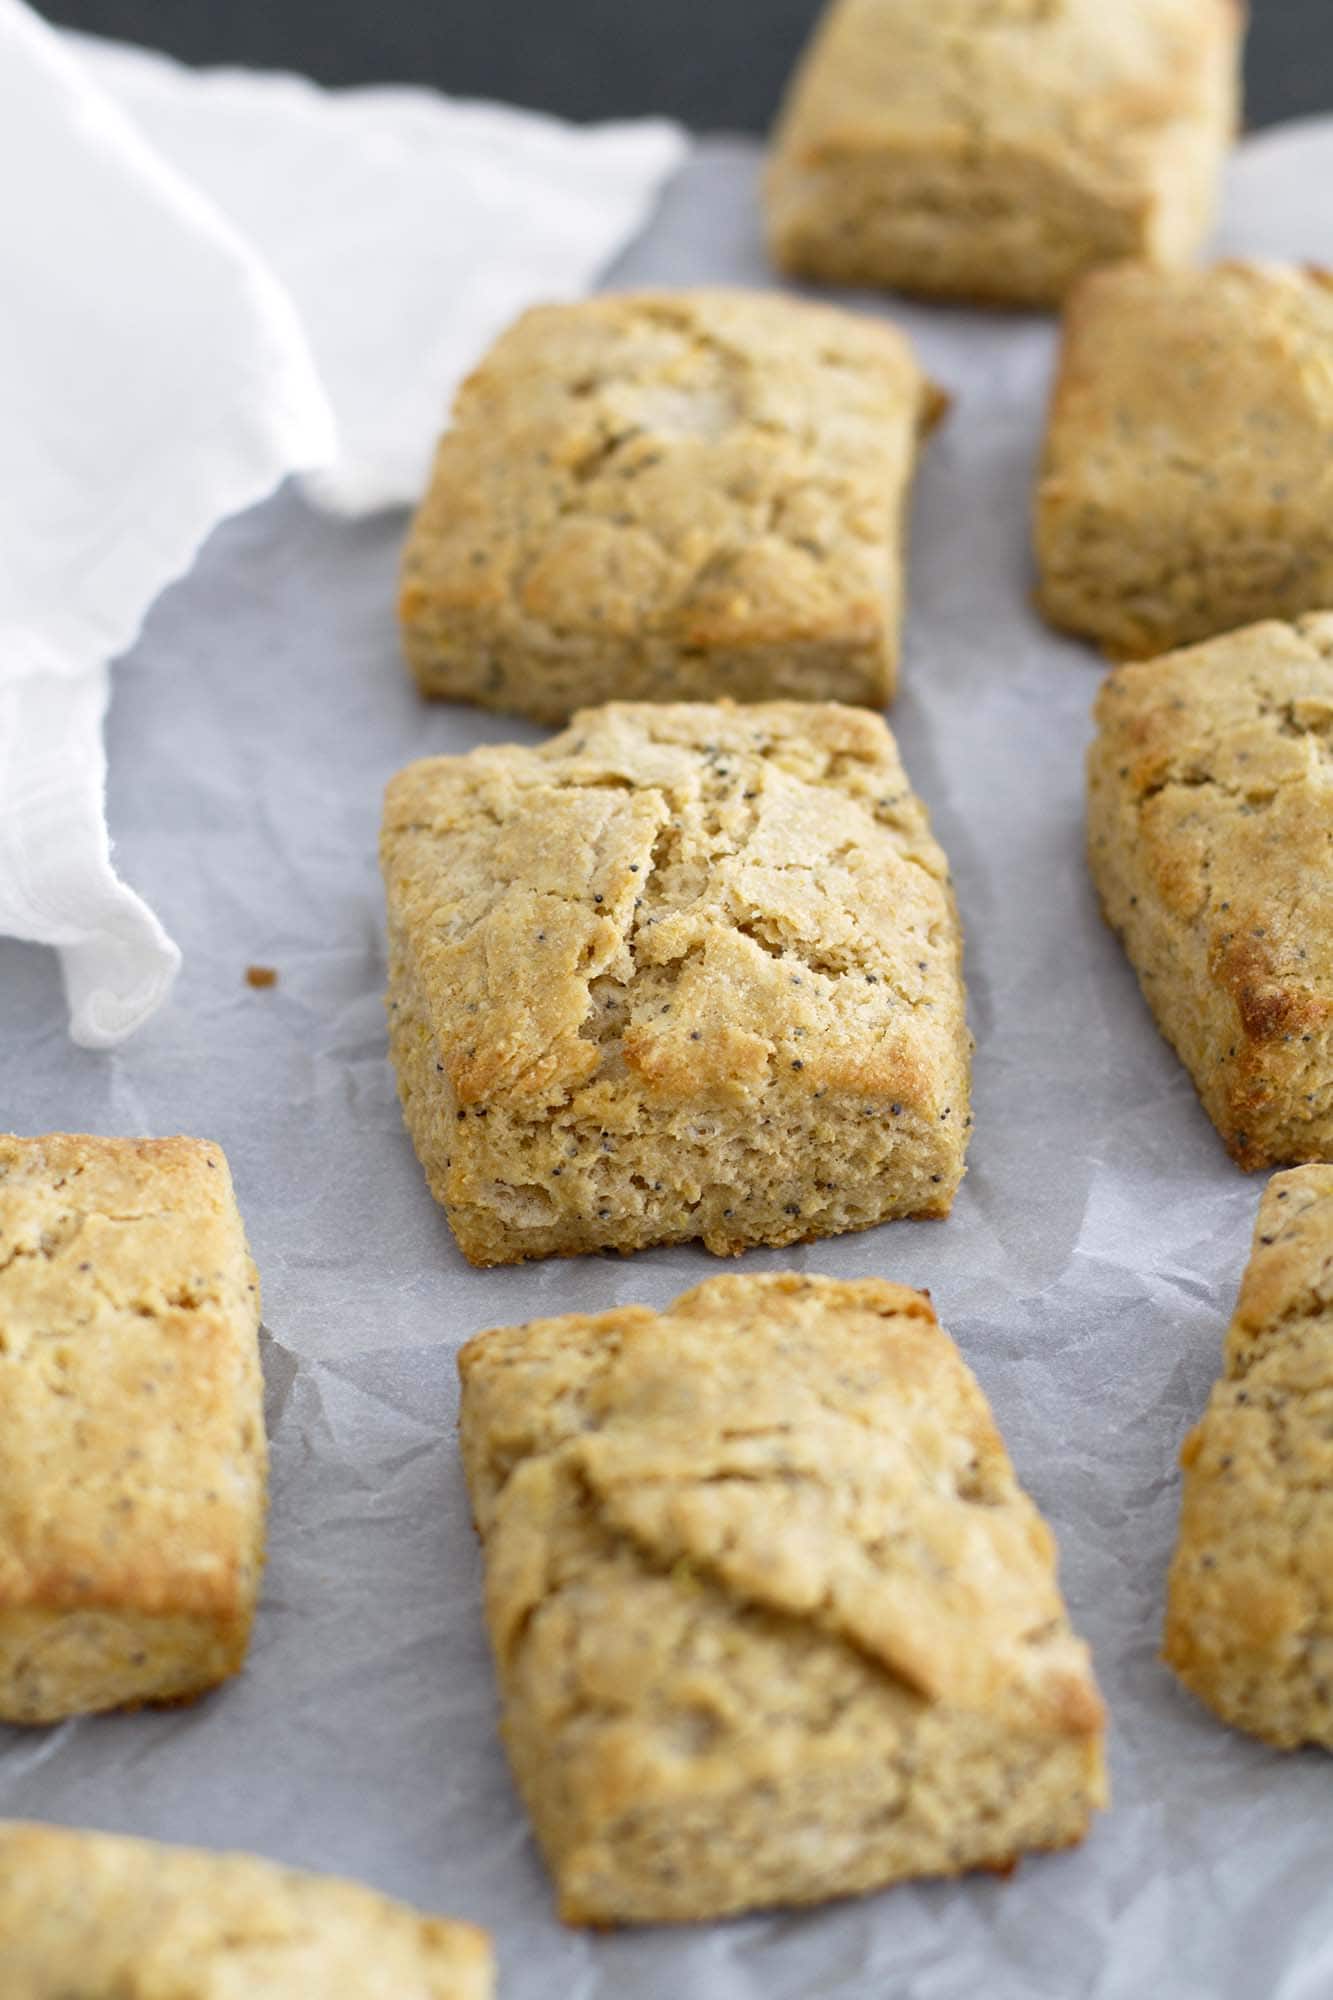 lemon poppy seed biscuits on parchment paper